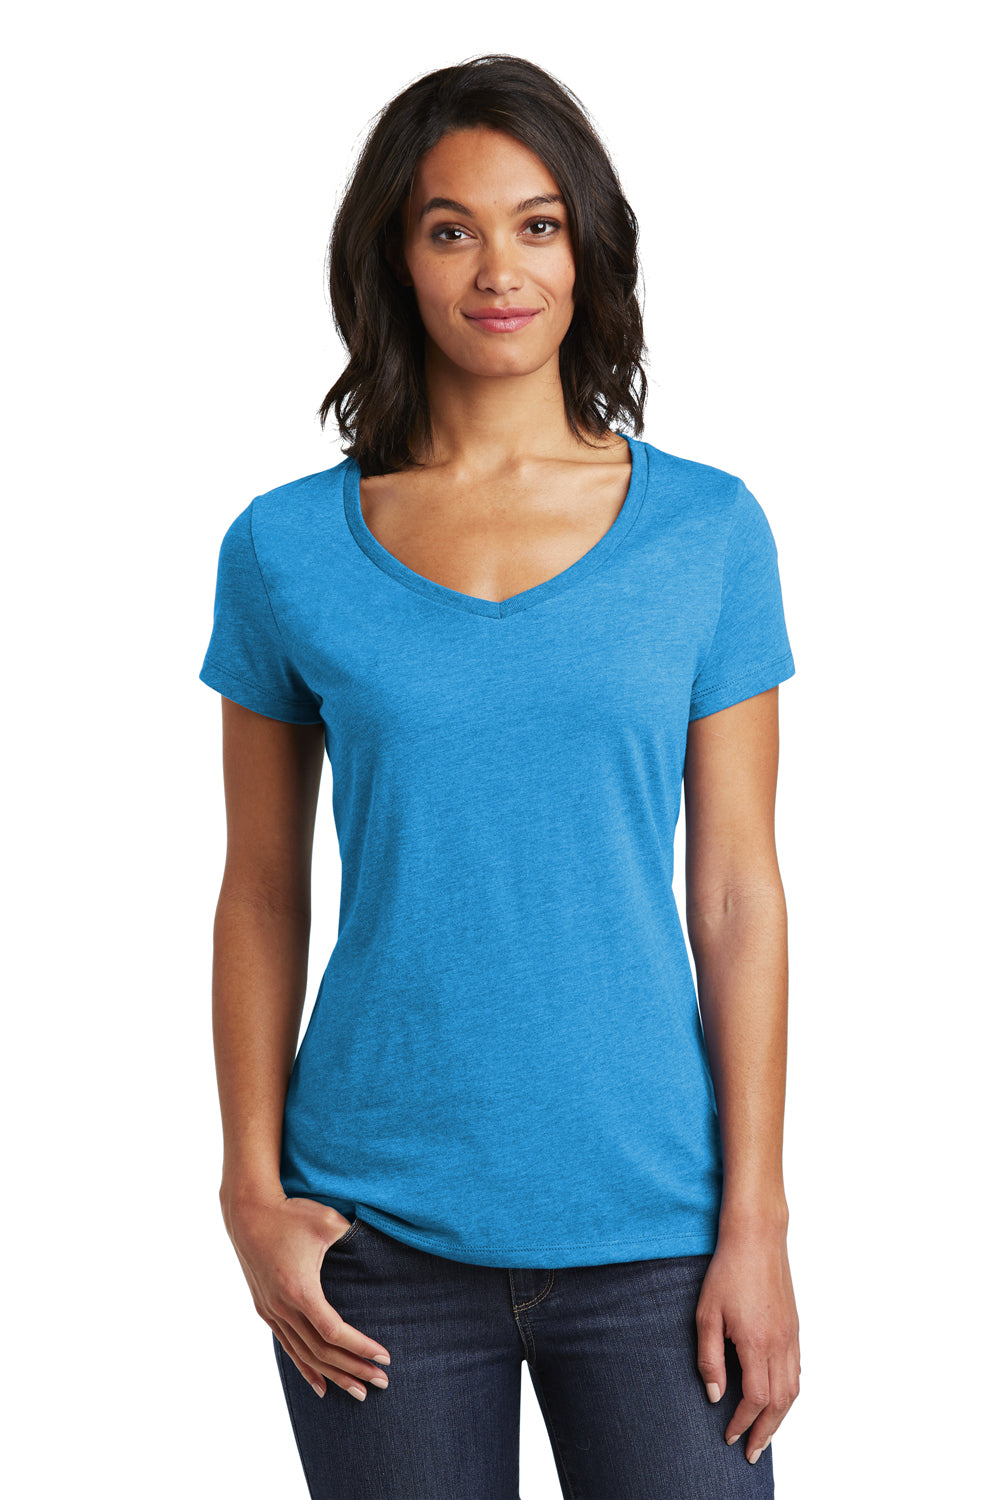 District DT6503 Womens Very Important Short Sleeve V-Neck T-Shirt Heather Turquoise Blue Front